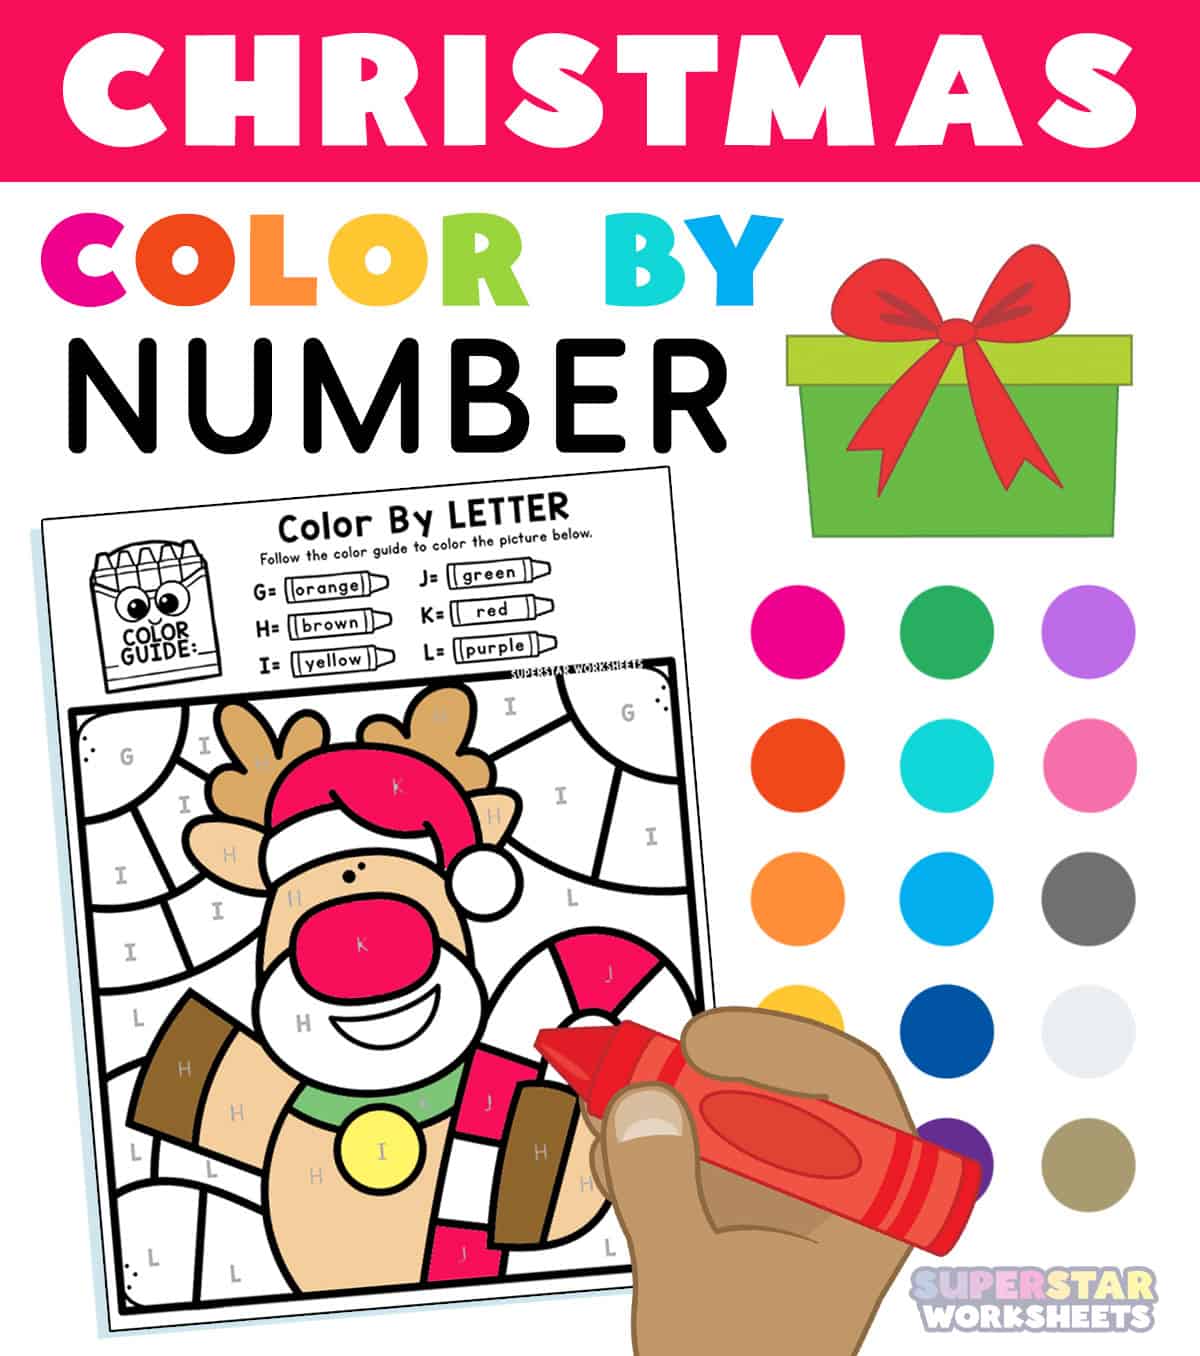 Large Print Christmas Color By Number Adult Coloring Book